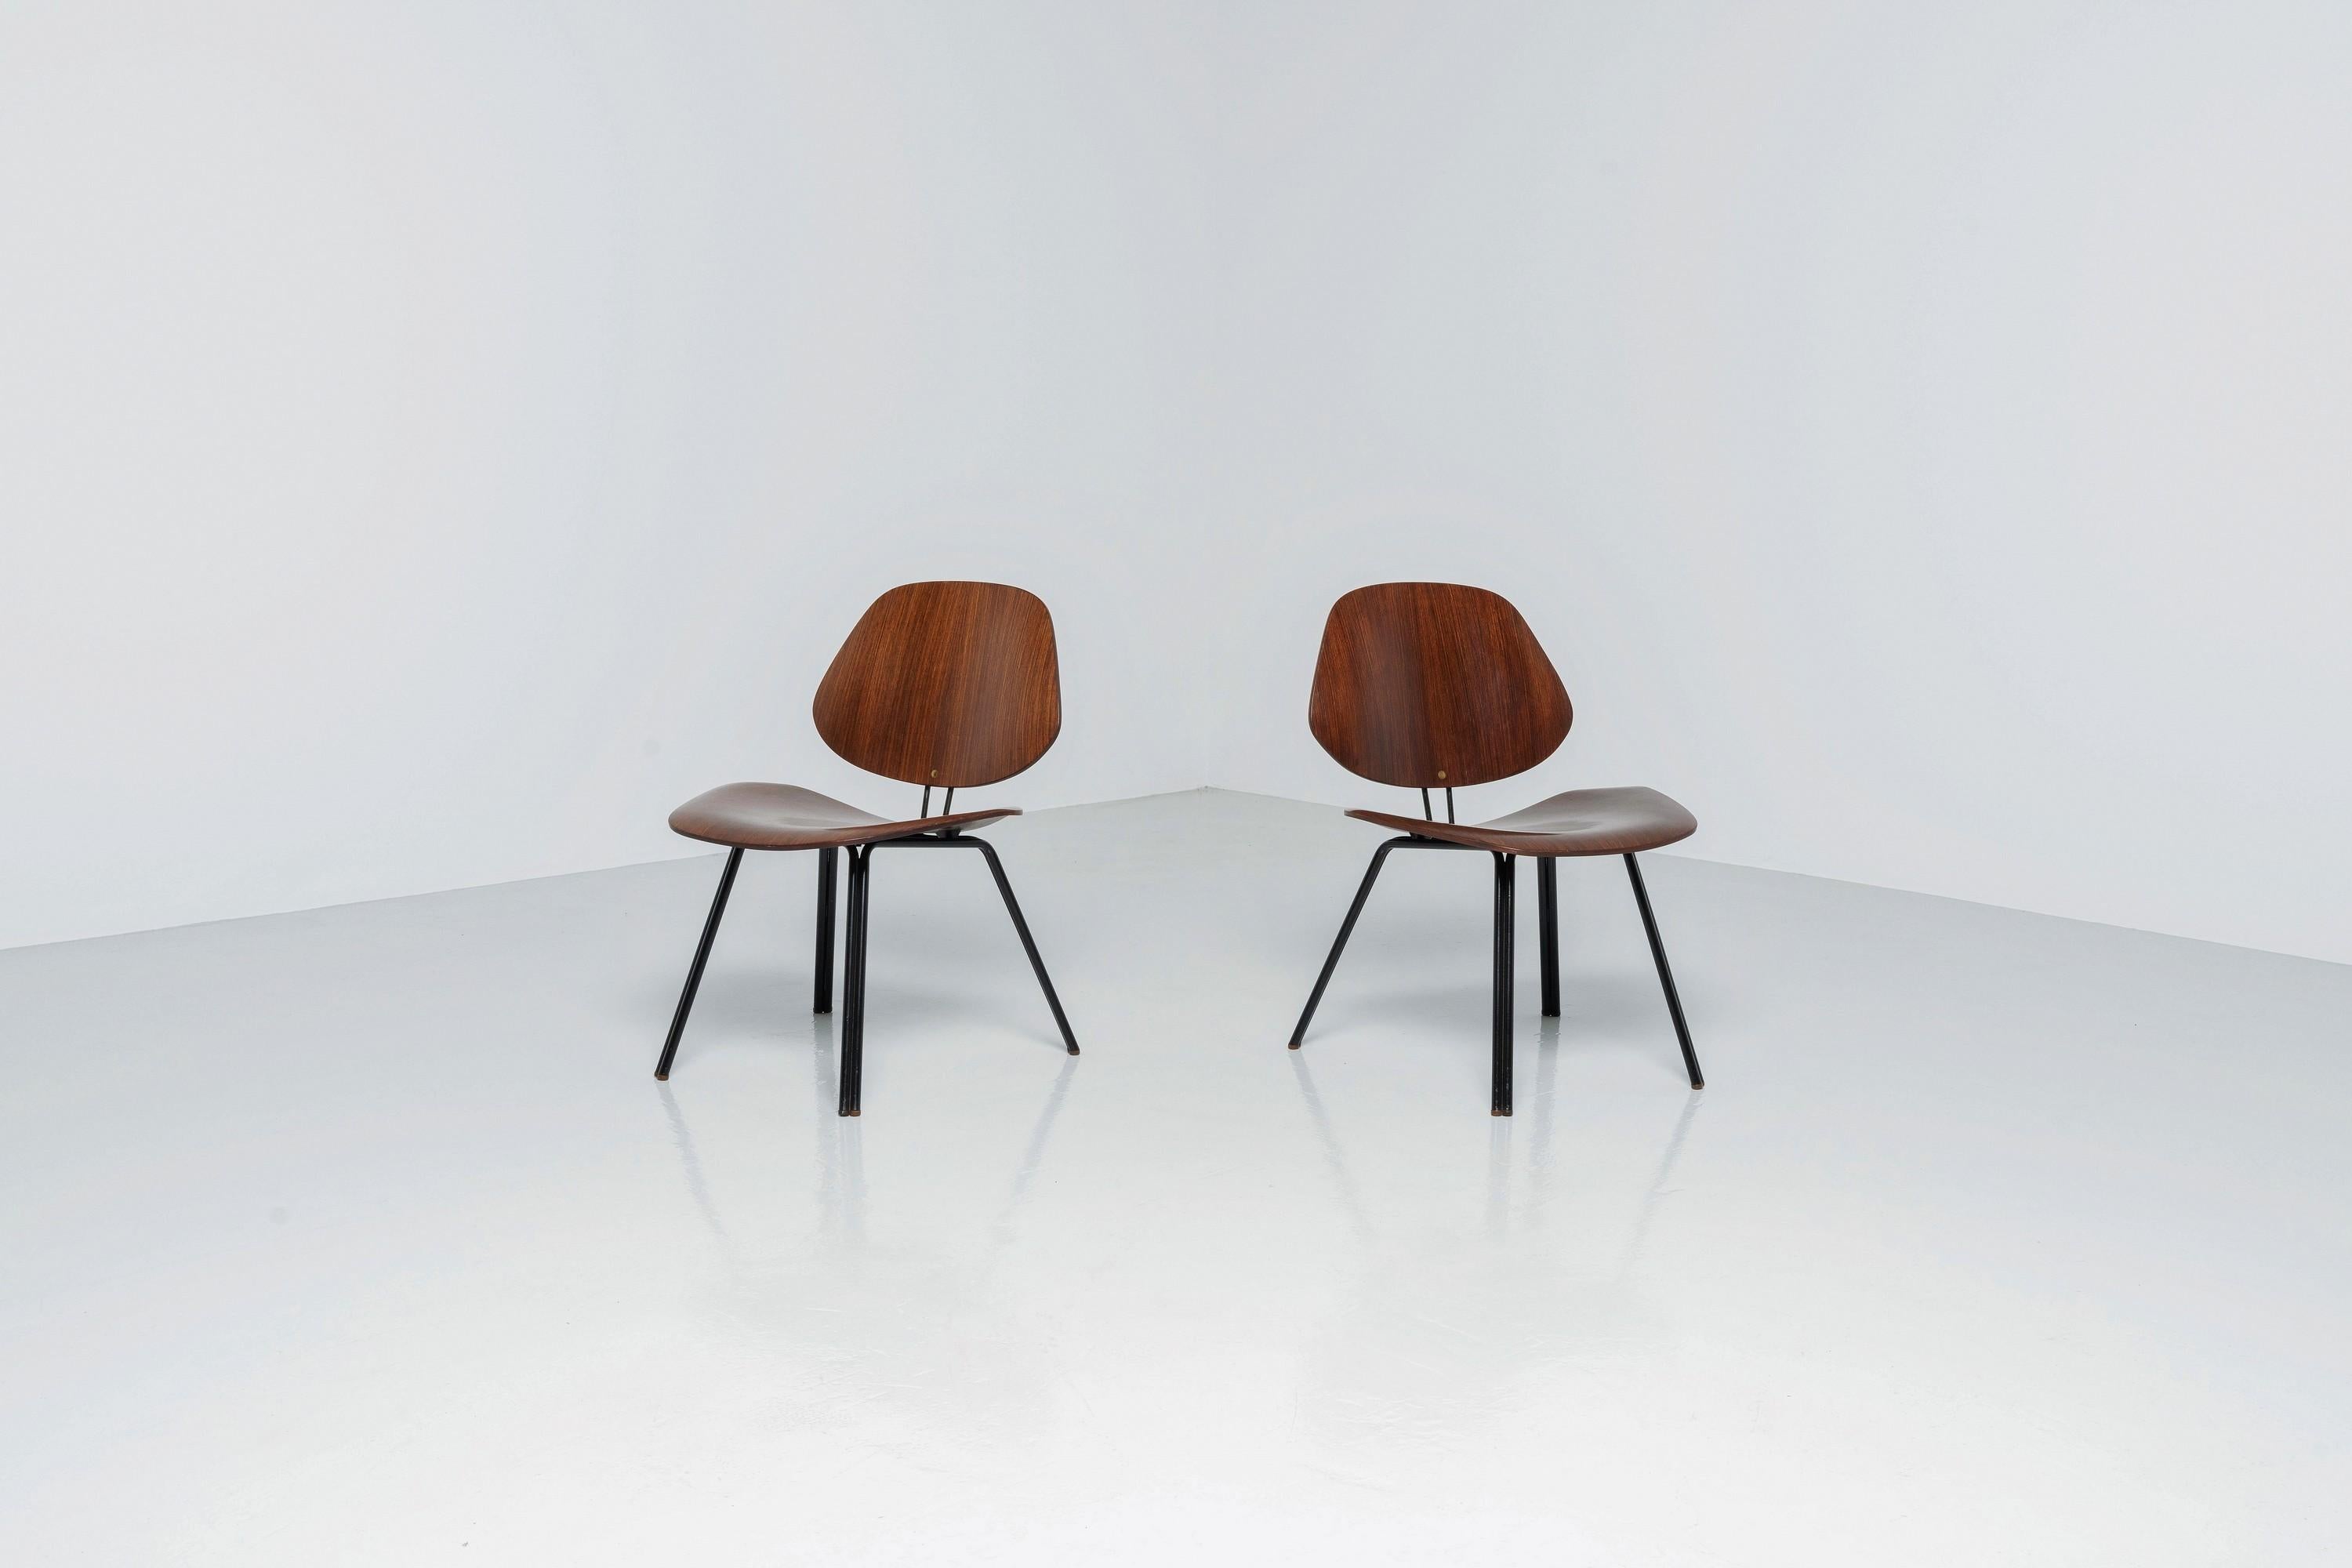 Beautiful P31 chairs by Osvaldo Borsani and made in Italy by Tecno in 1957. The chairs are in fully original condition and have a wonderful patina, which only adds value to them. These two chairs are marked with the Tecno emblem on the back, are